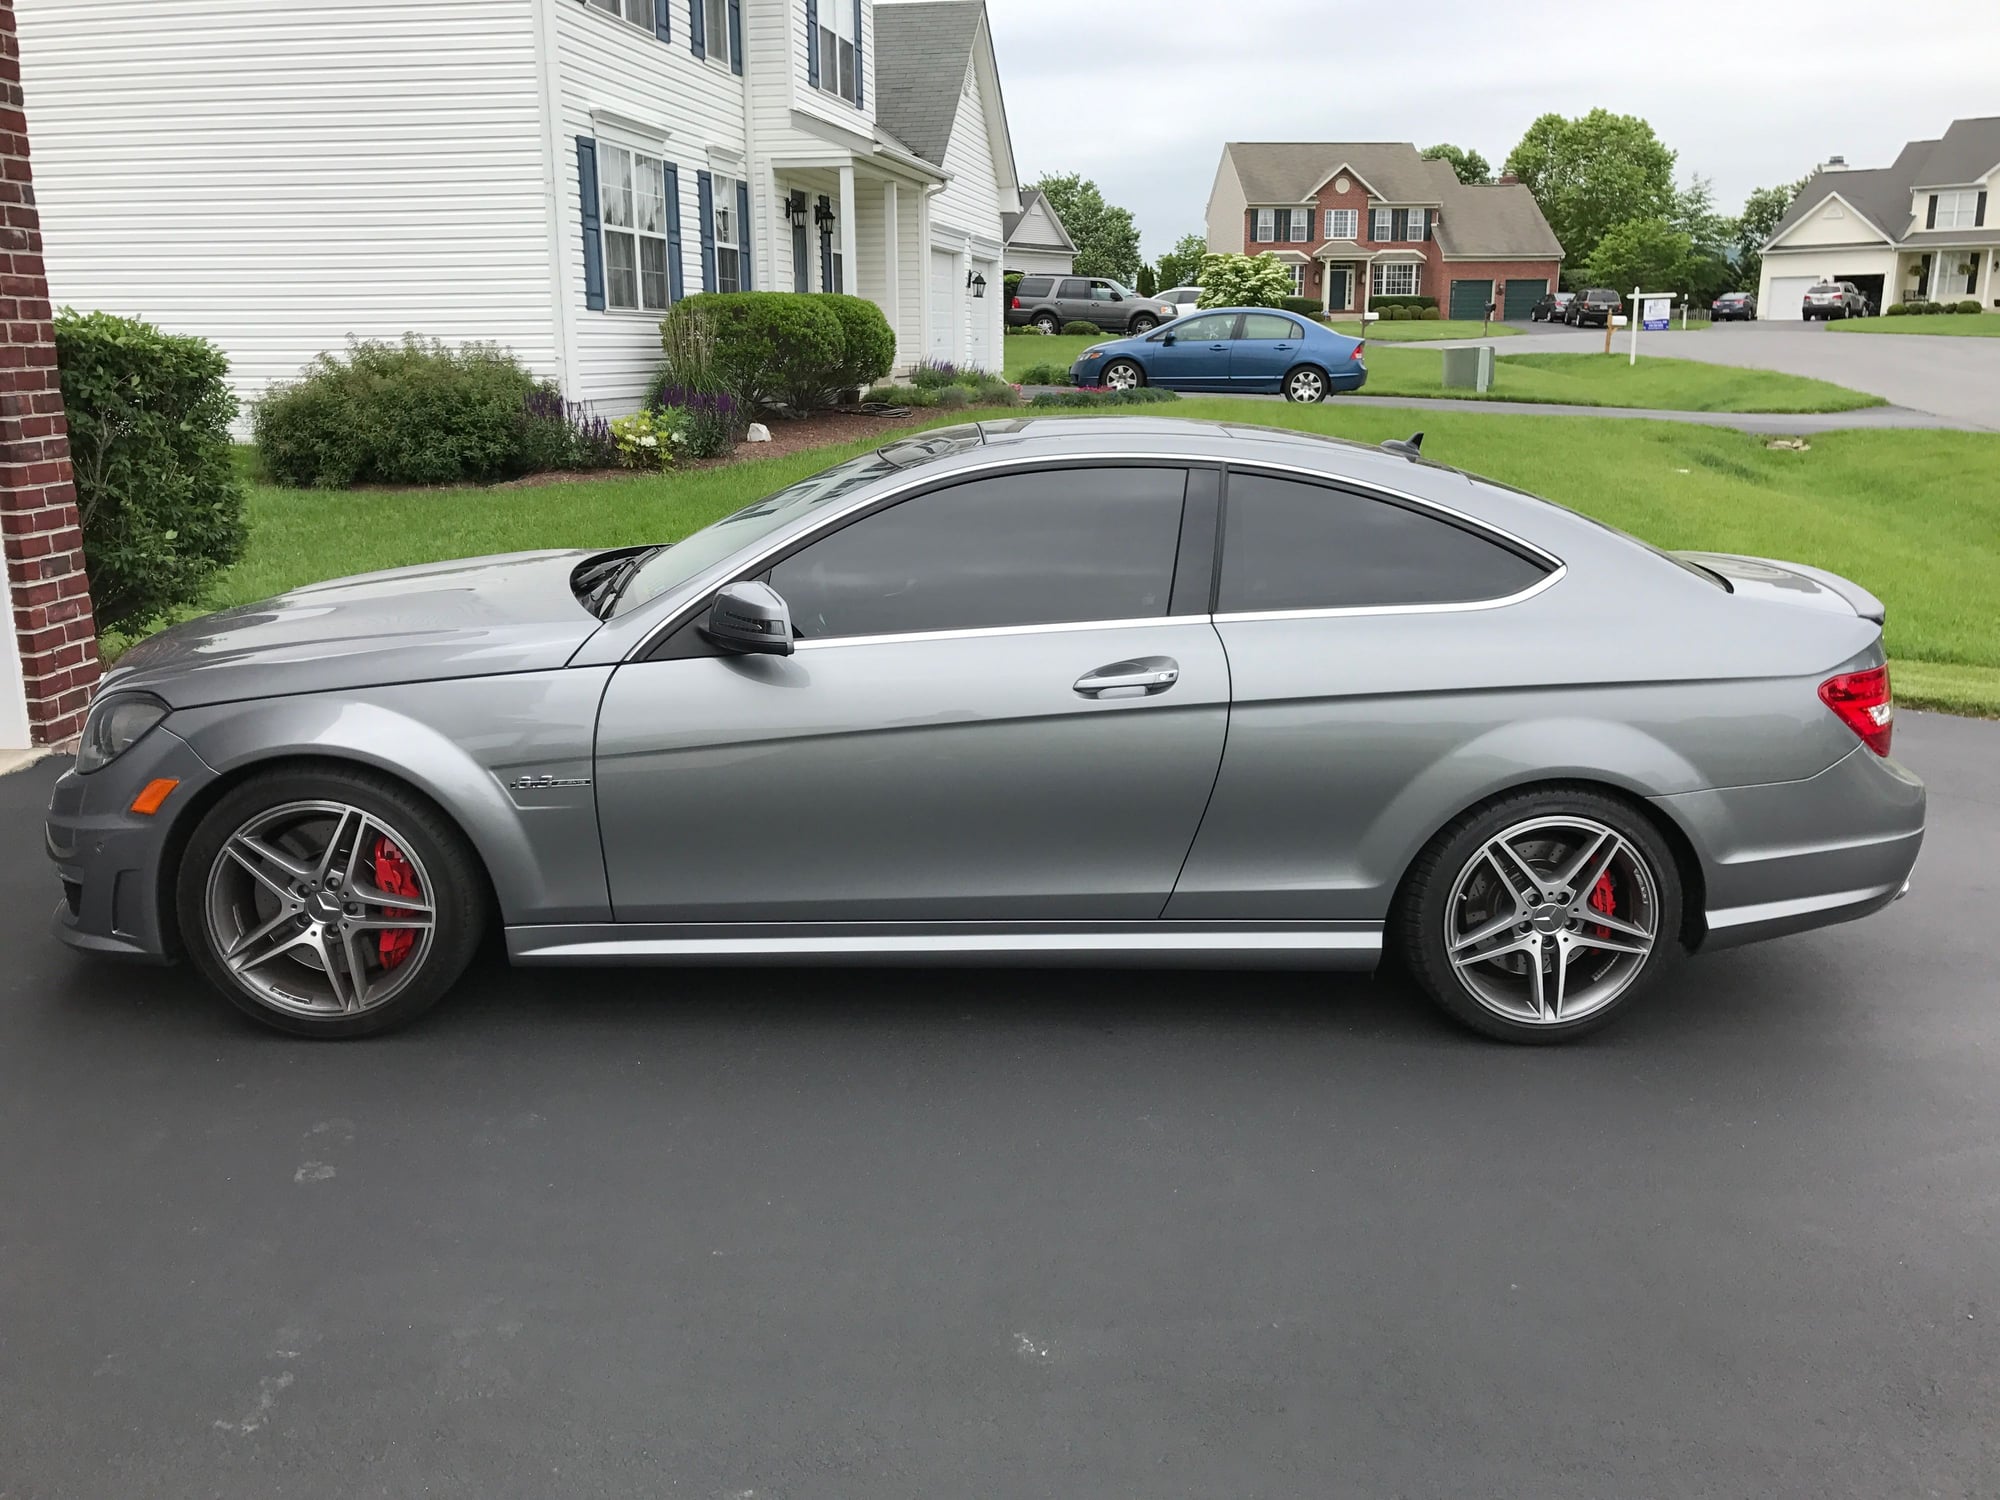 2012 Mercedes-Benz C63 AMG - Mercedes-Benz C63 AMG Coupe P31 Development Package & Designo Leather Upgrade - Used - VIN WDDGJ7HB8CF846541 - 47,700 Miles - 8 cyl - 2WD - Automatic - Coupe - Philadelphia, PA 19019, United States